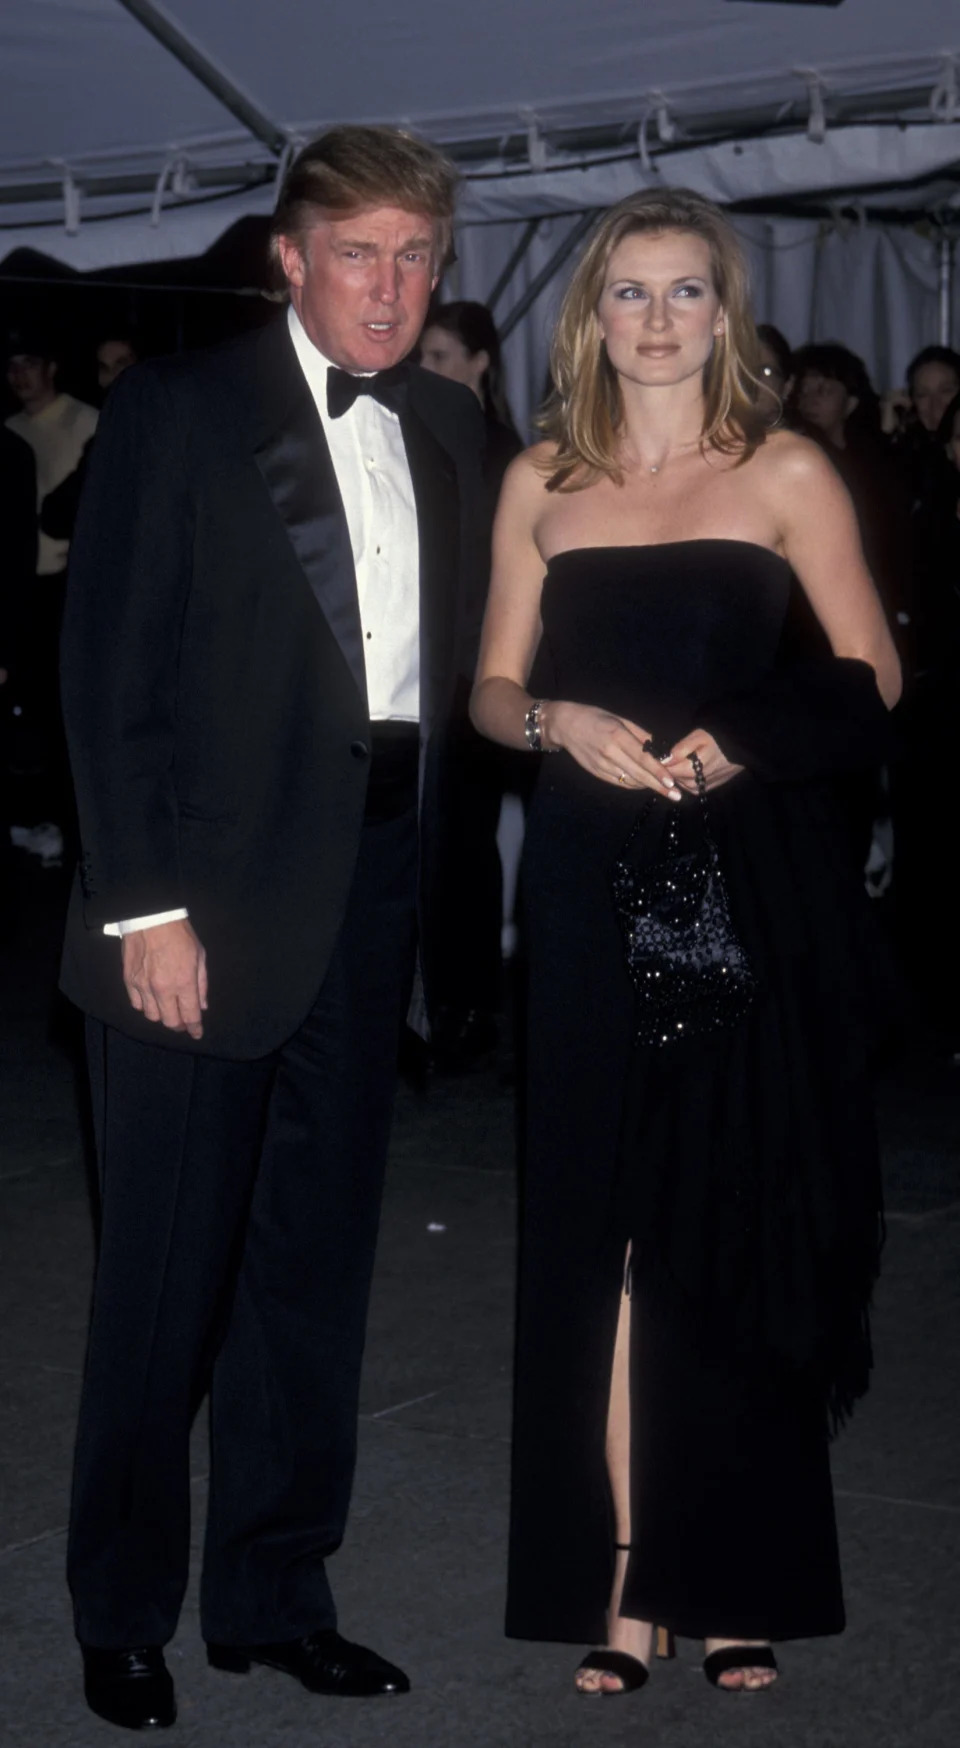 Donald Trump and Andrea Murray at the Met Gala in 1998